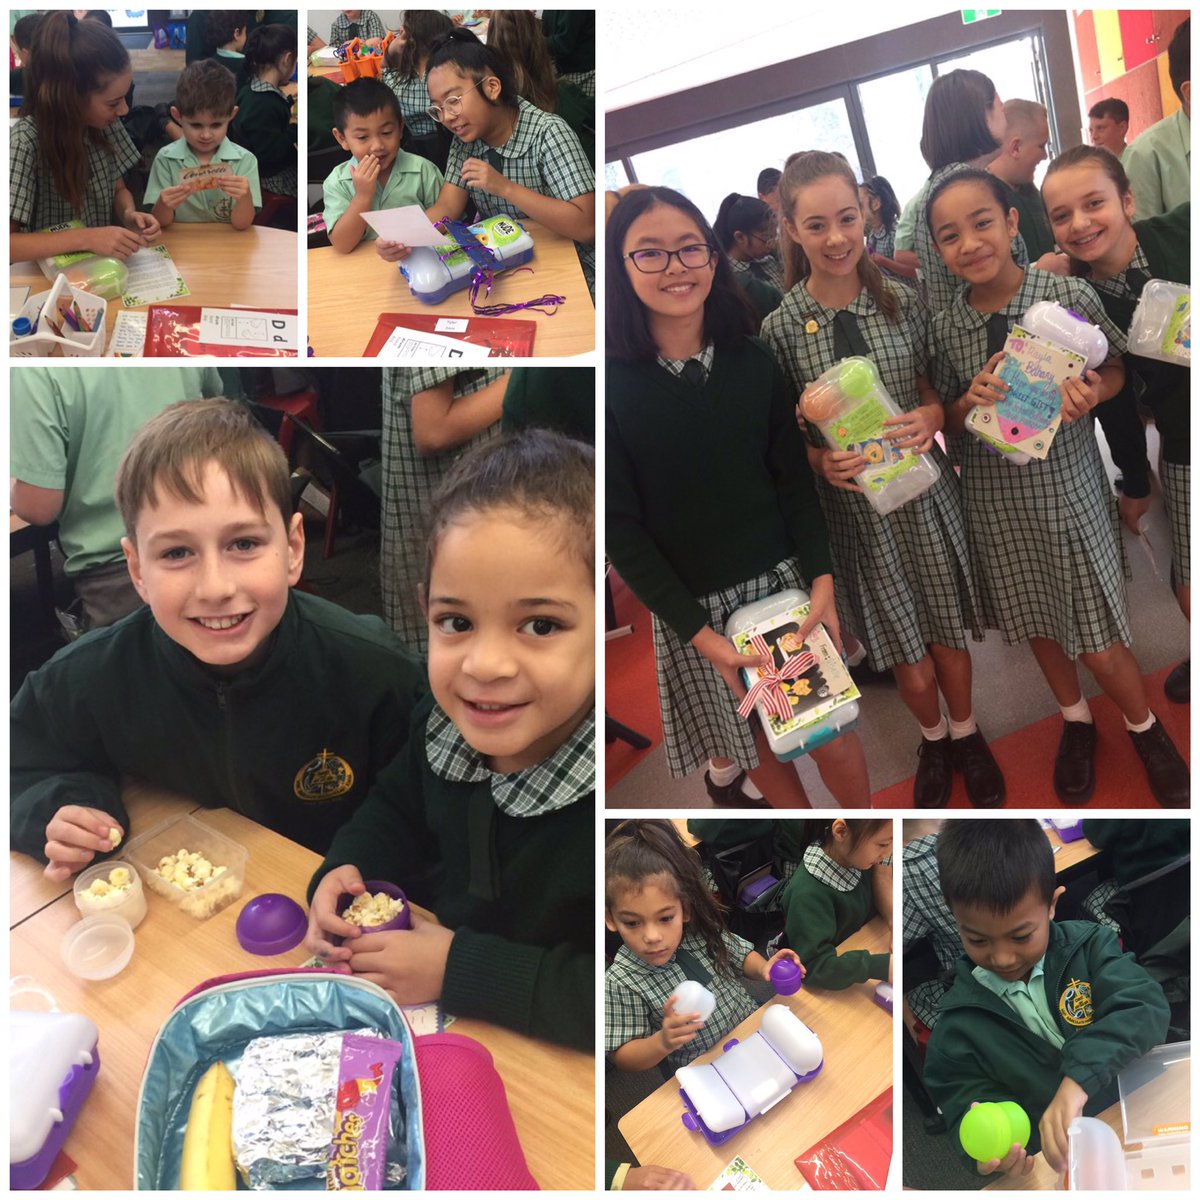 Year 6 were excited to gift their Kinder Buddies with eco friendly lunchboxes today. #environmentaleducation #trashfree #lunch #school #education